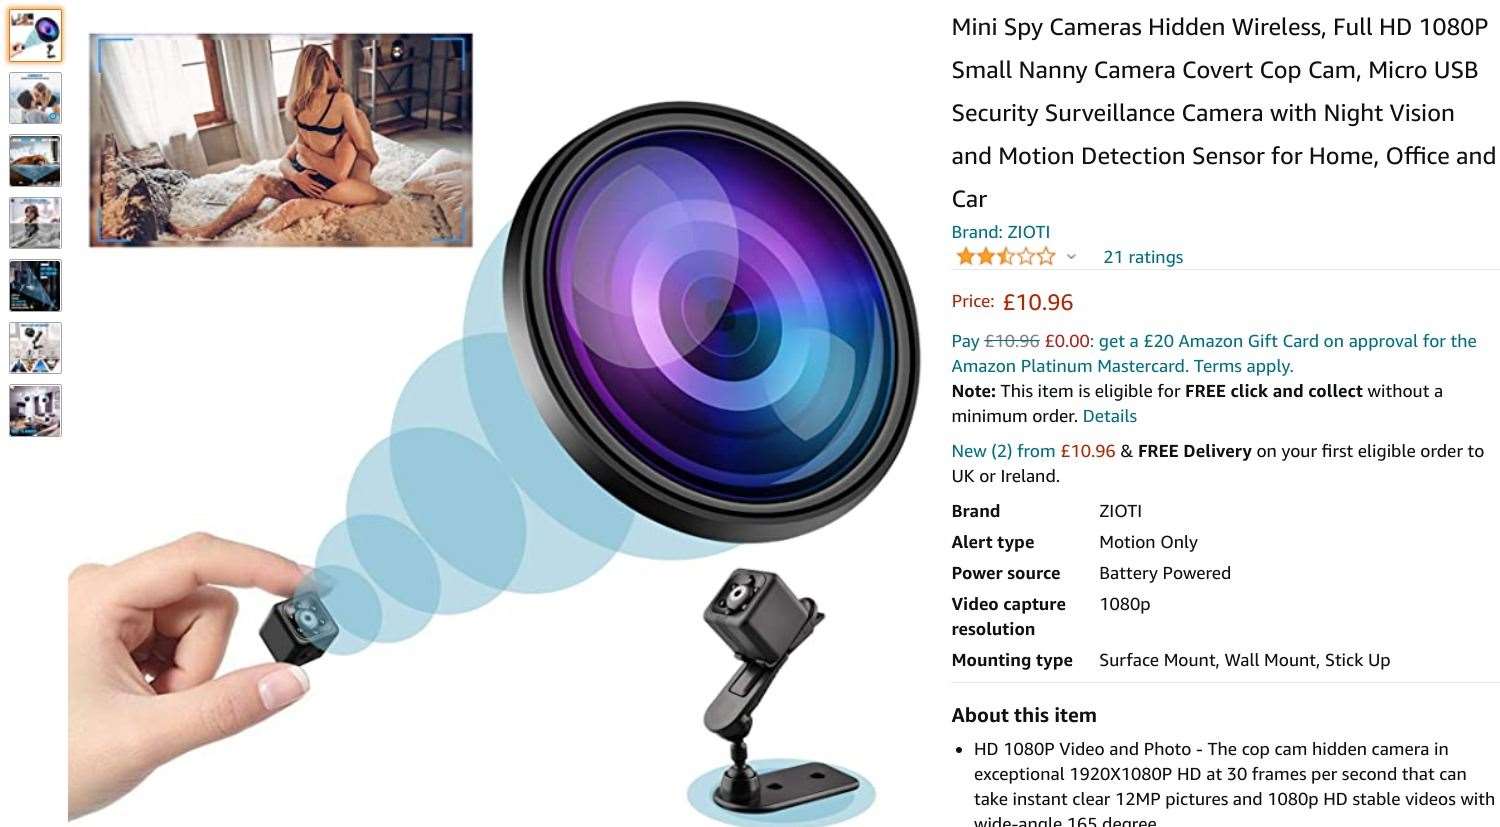 A listing for a hidden camera on Amazon